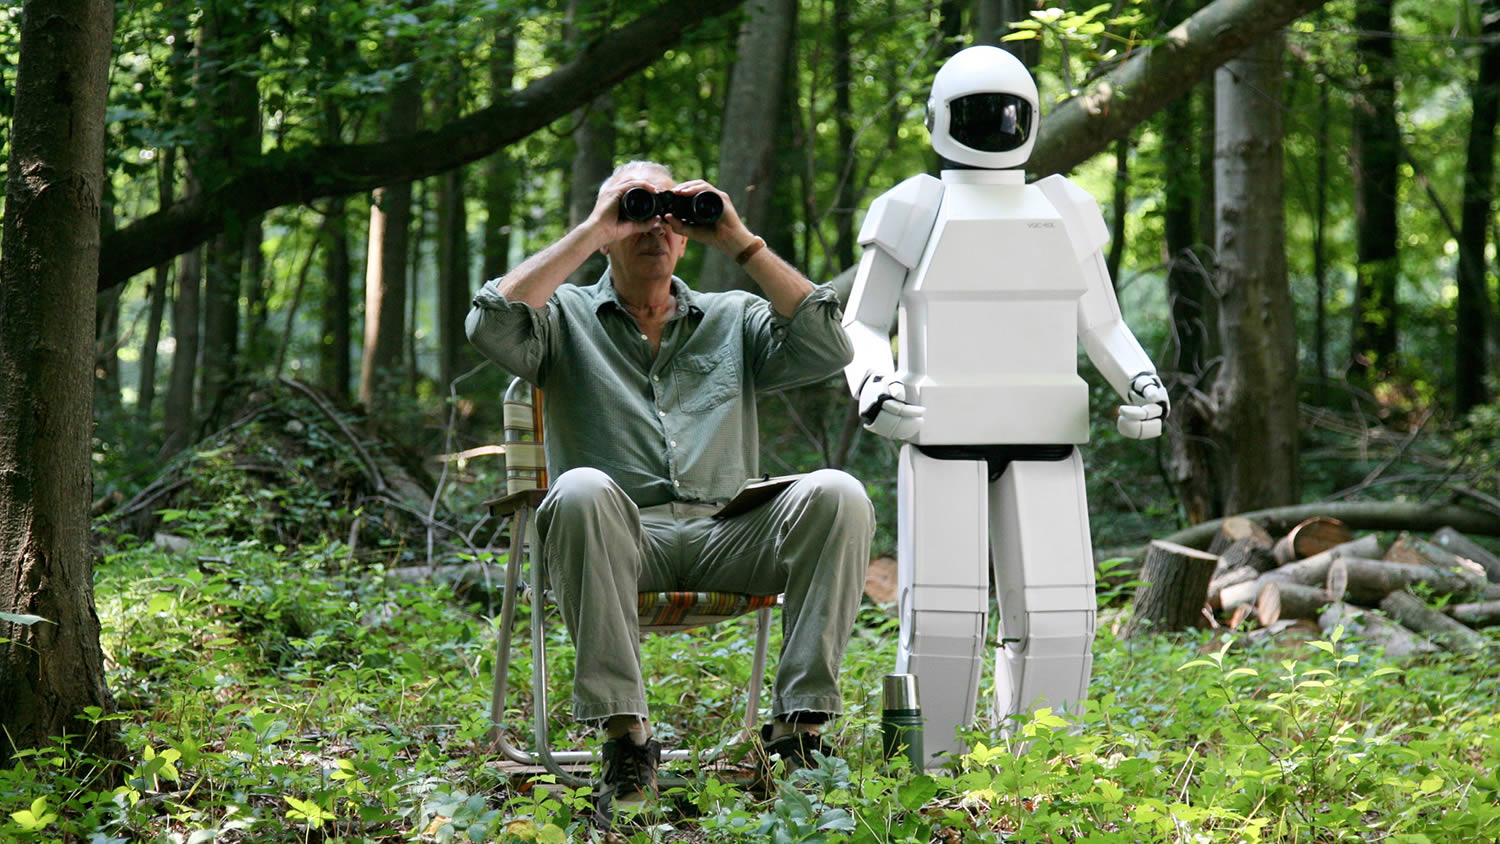 robot & frank, man sitting in chair with binoculars and robot at side